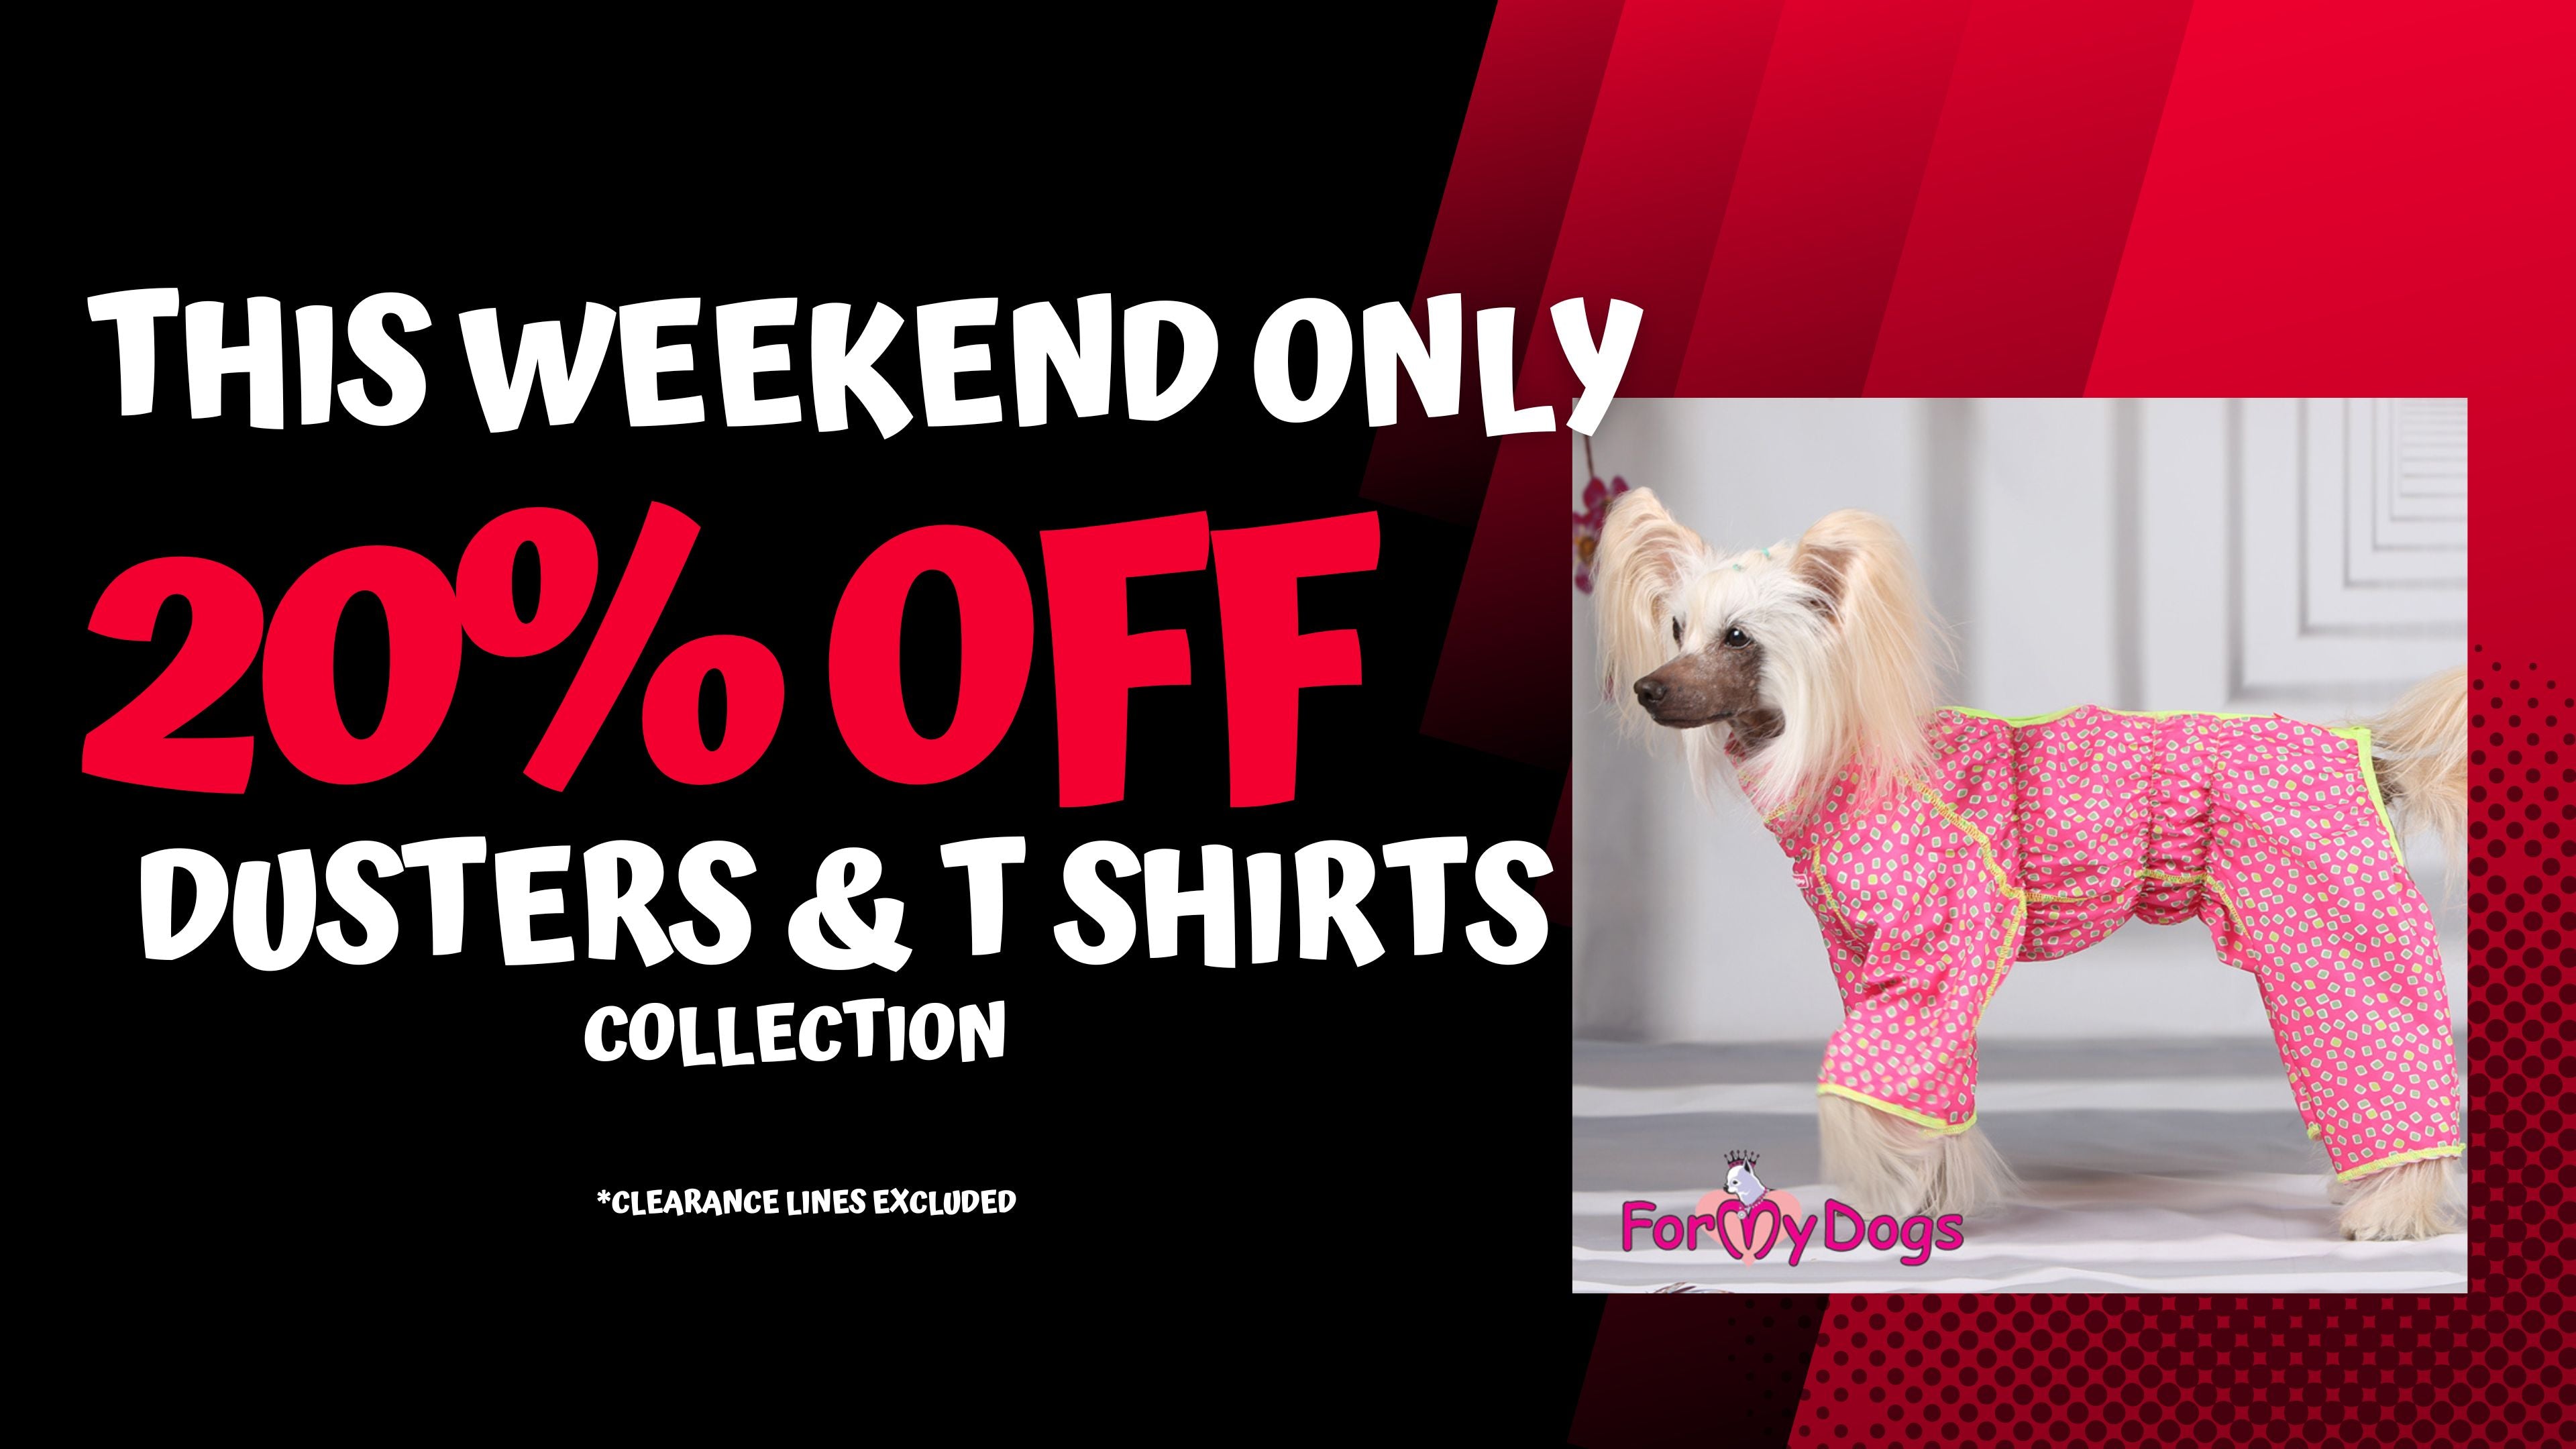 20% OFF Dusterrs & T Shirts This Weekend Only T&Cs